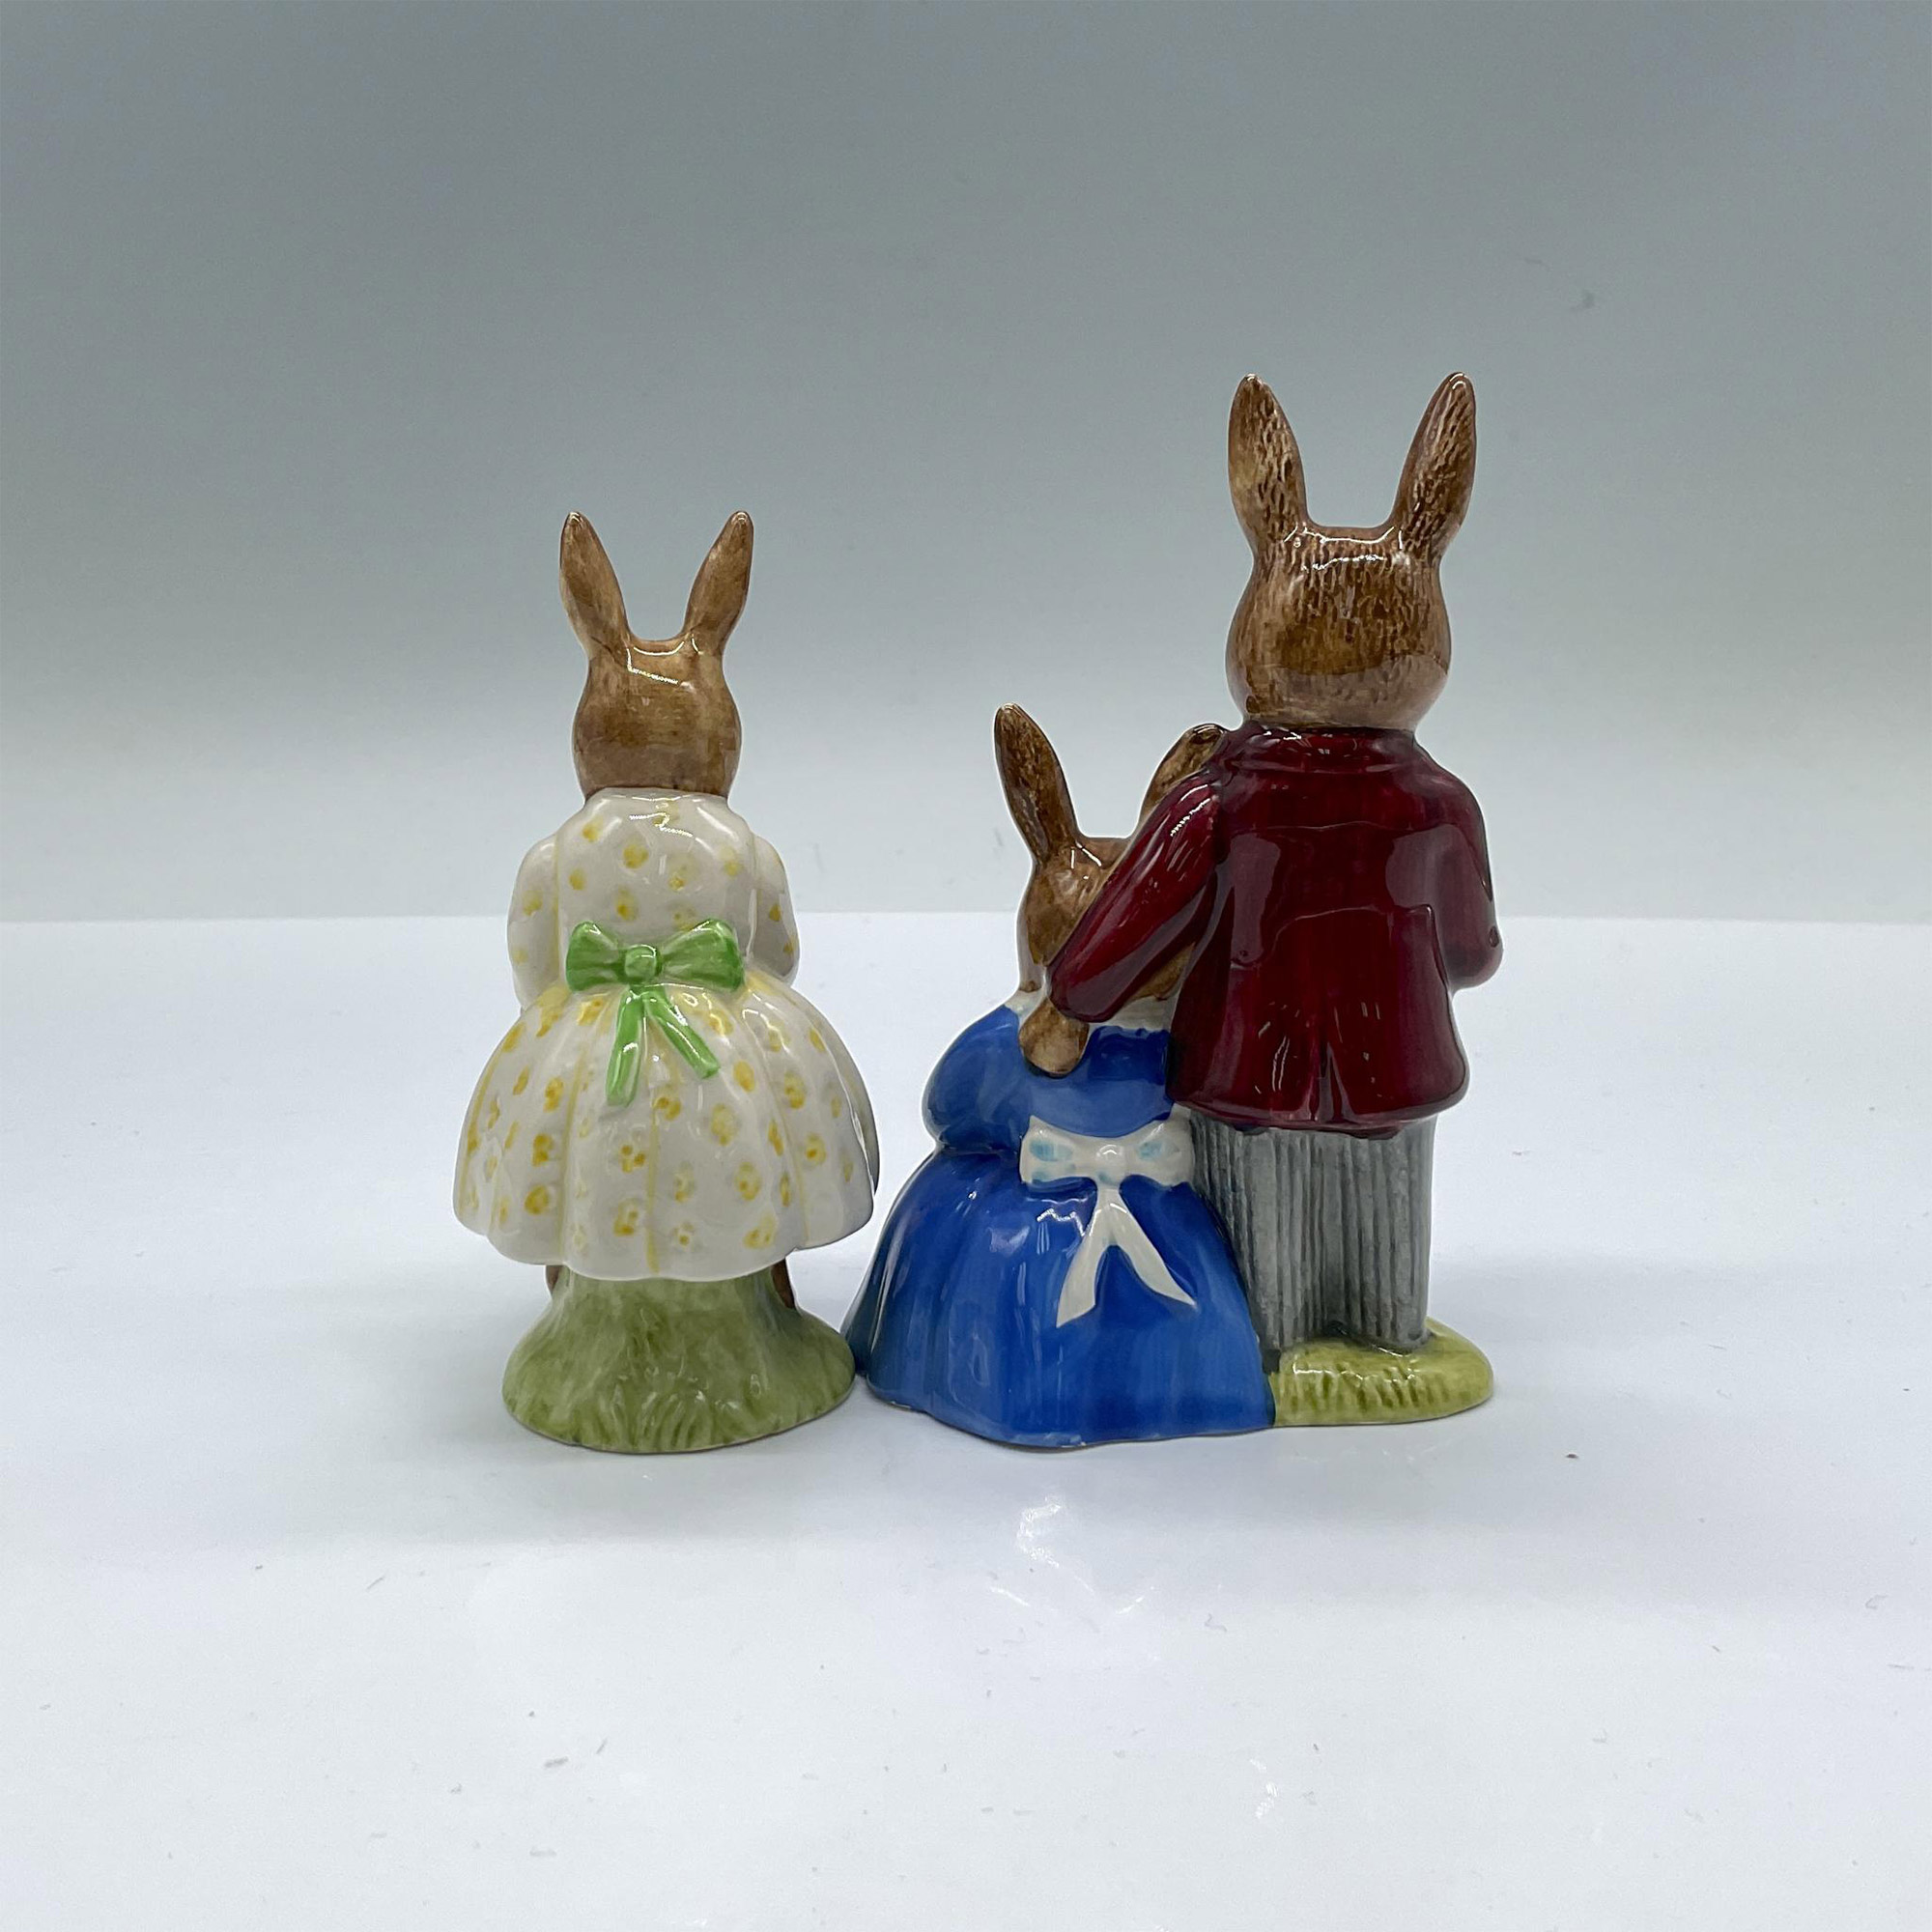 2pc Royal Doulton Figurines, Family Photo & Playtime DB1/80 - Image 2 of 3